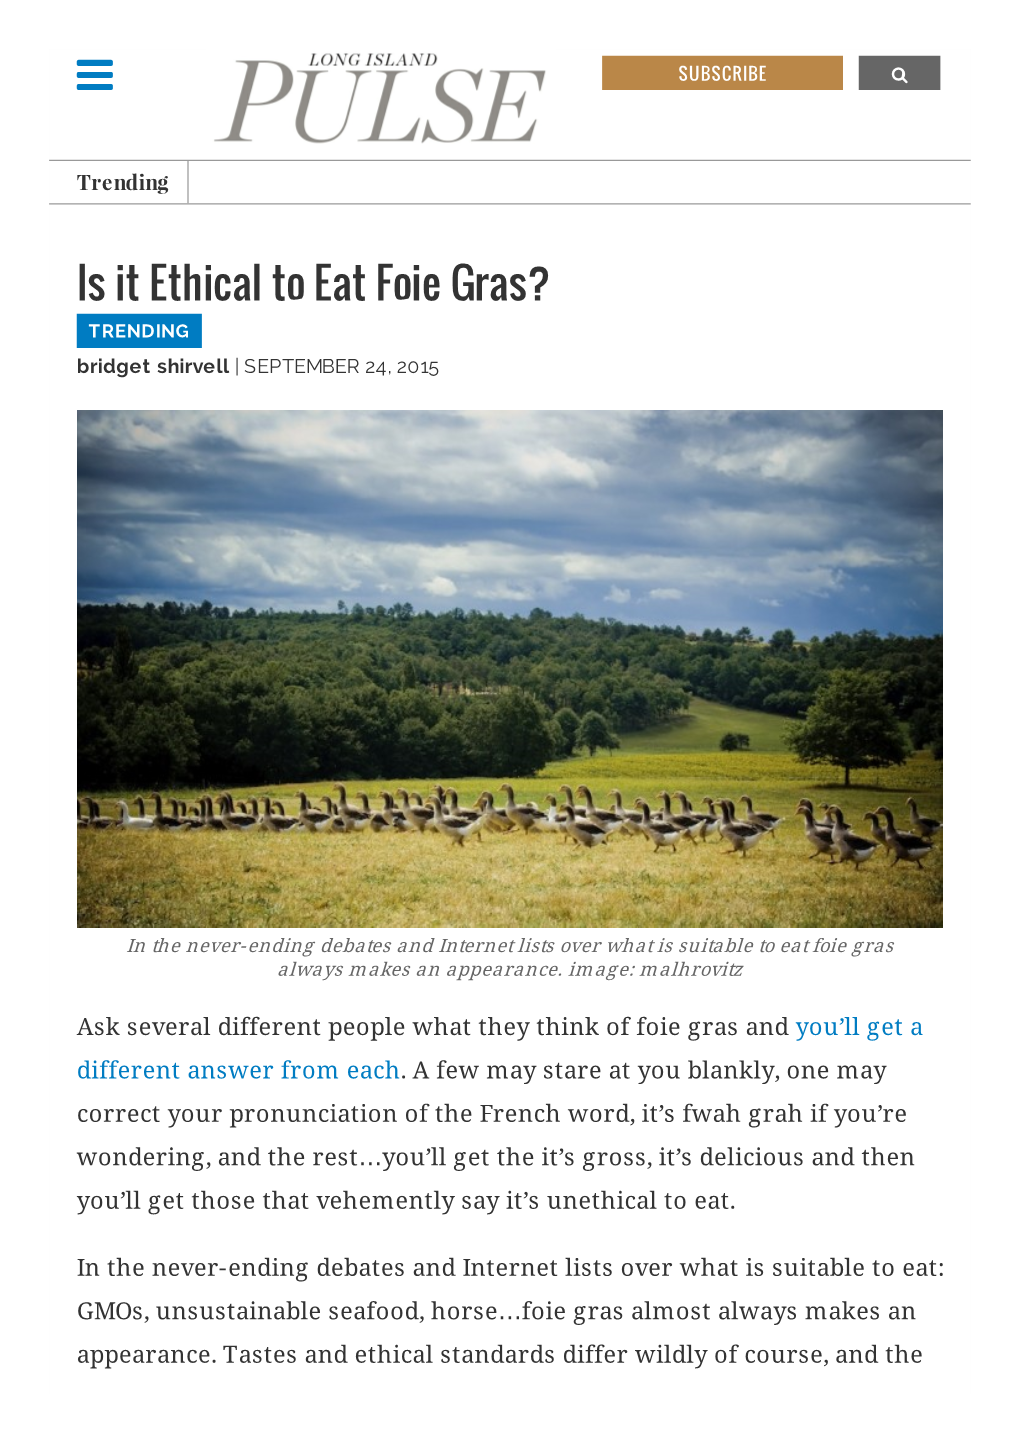 Is It Ethical to Eat Foie Gras? | Long Island Pulse Magazine